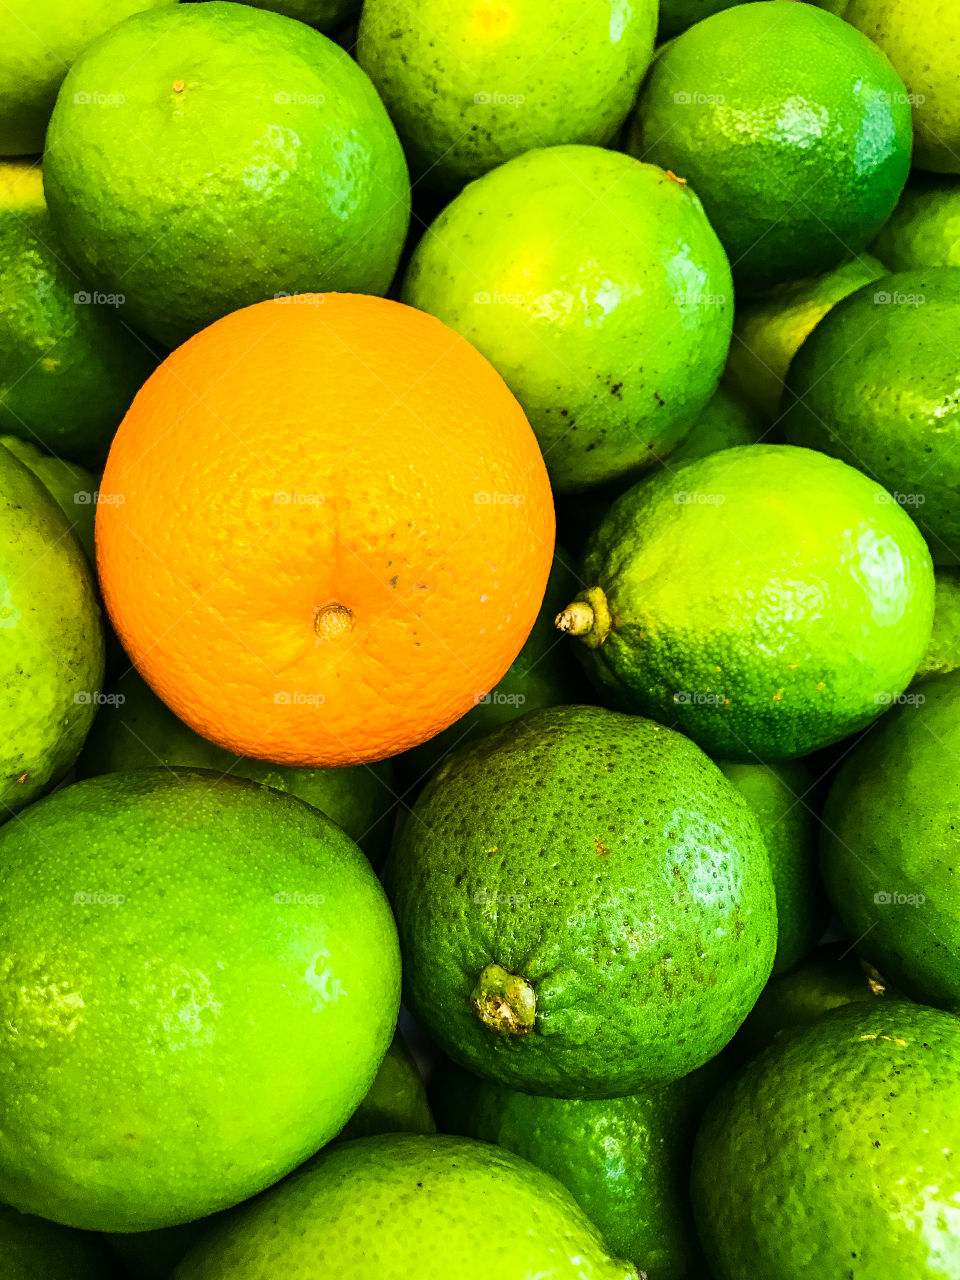 orange on a background of green limes